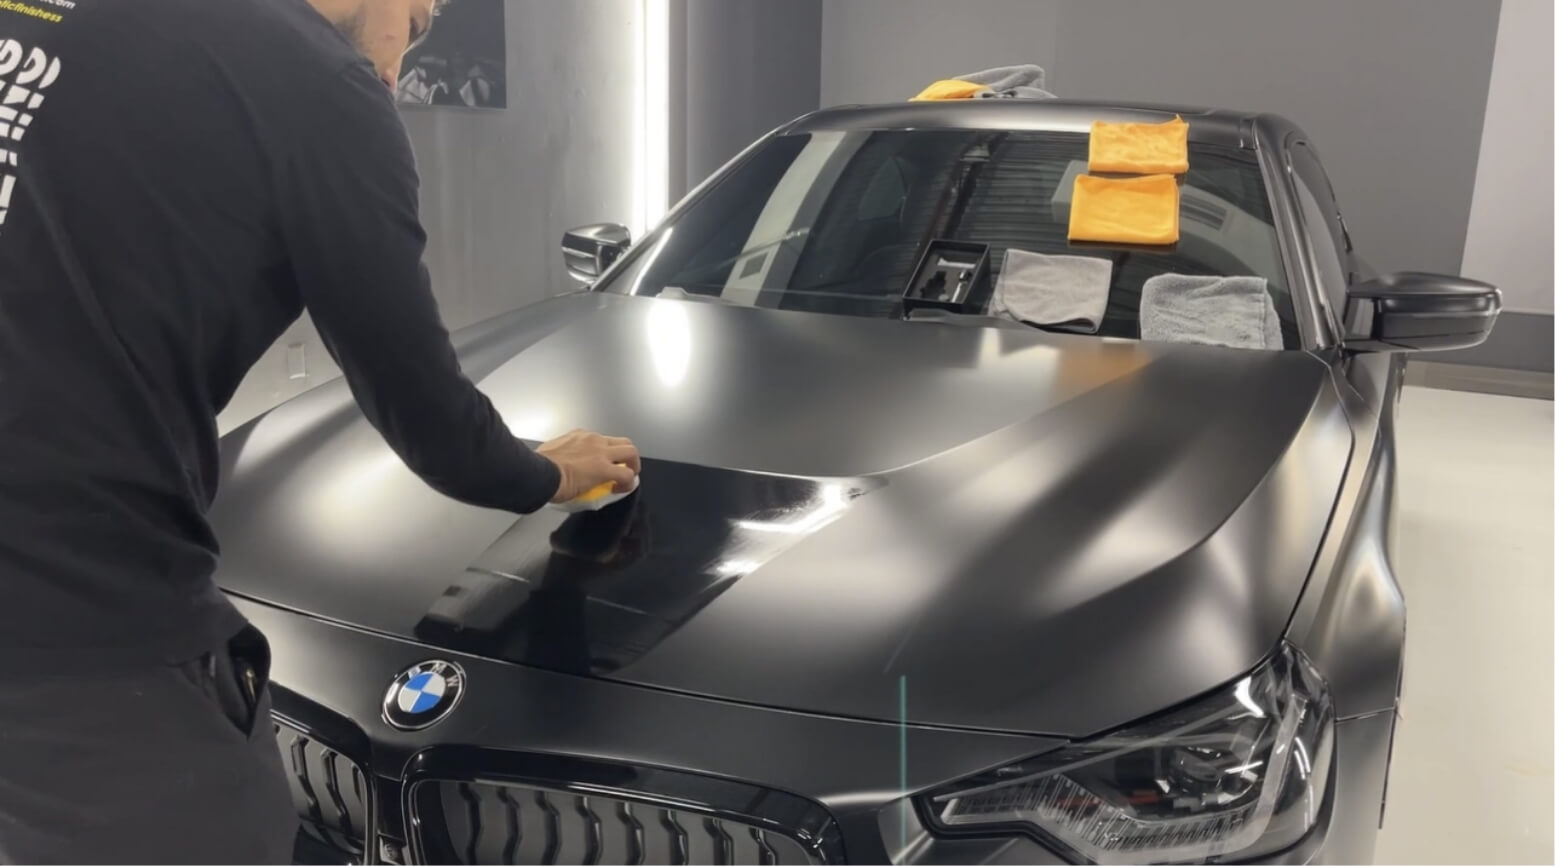 Xepl fusion plus ceramic coating being applied with a sponge on stealth paint protection film on a 2022 BMW m240i.